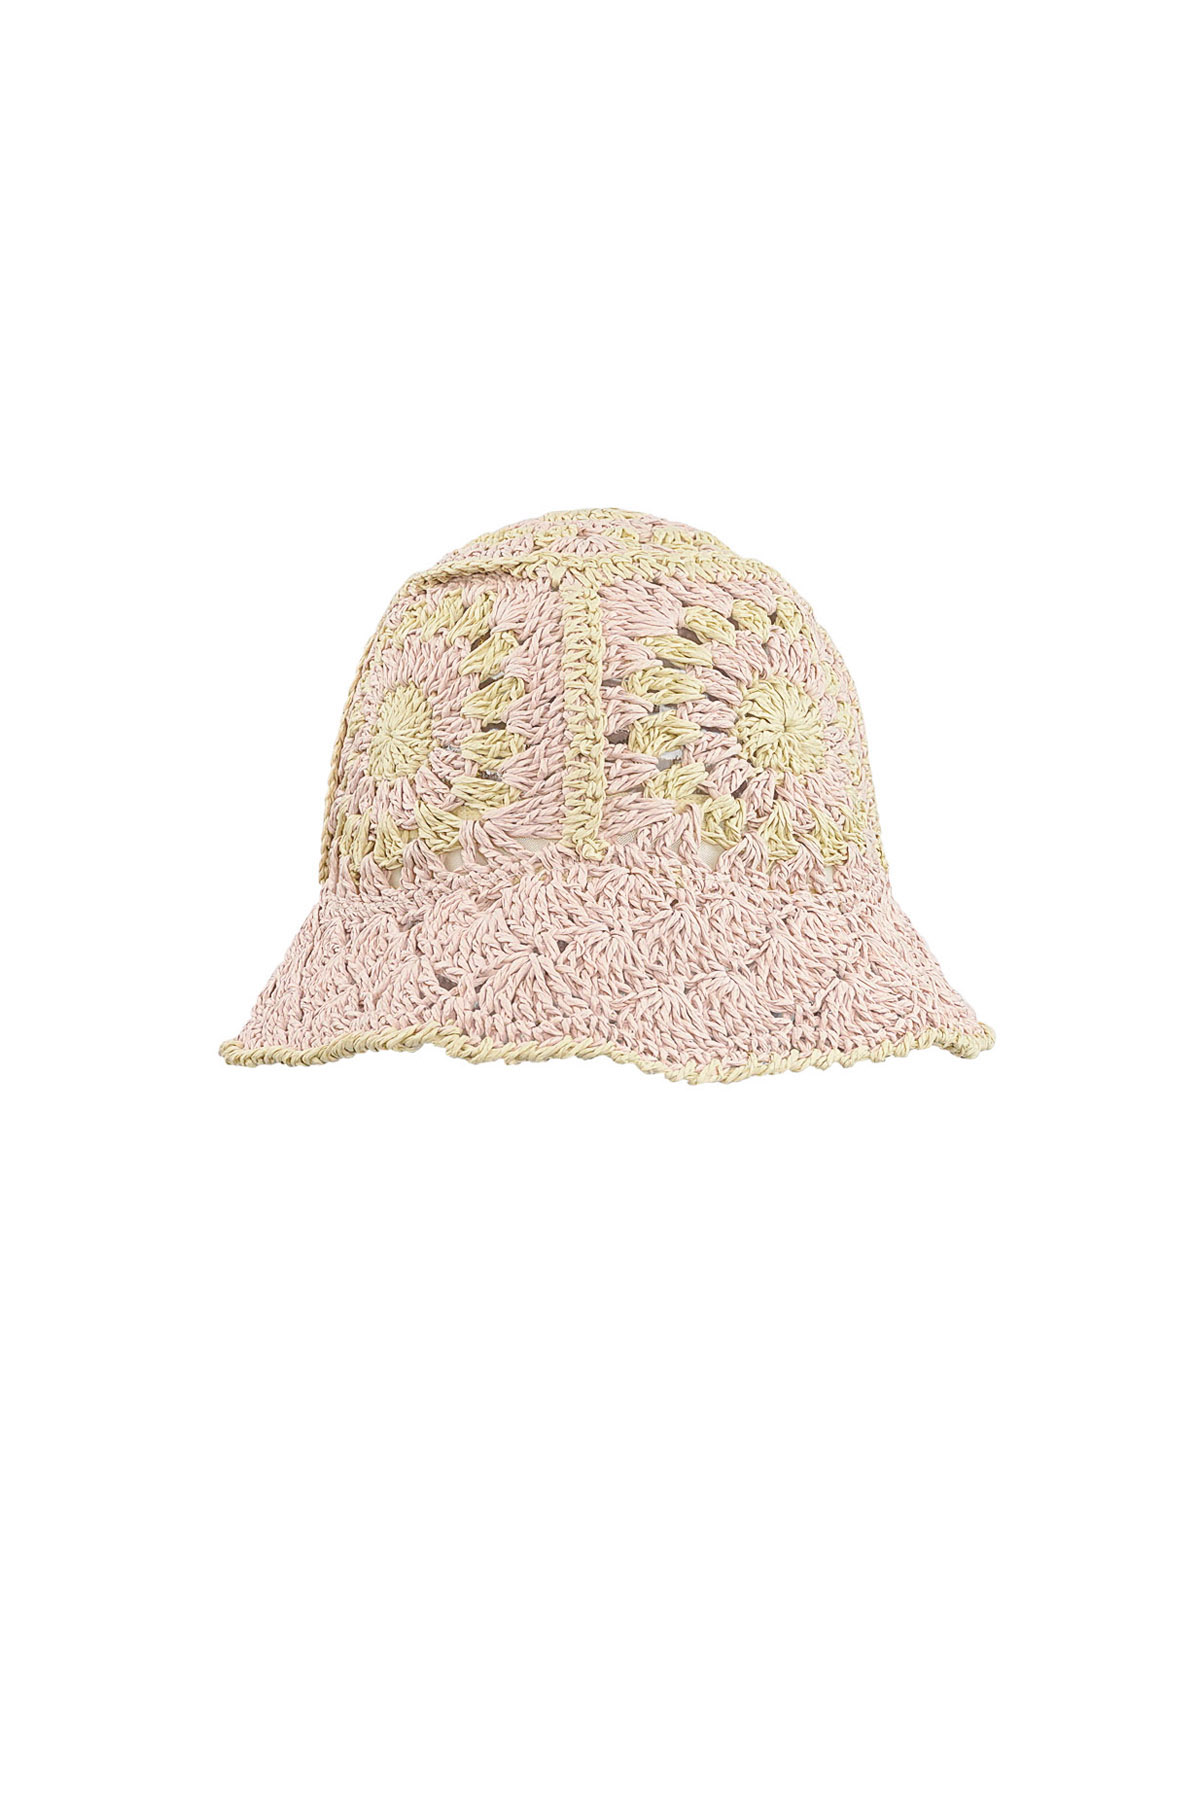 Crochet hat with flowers - pink h5 